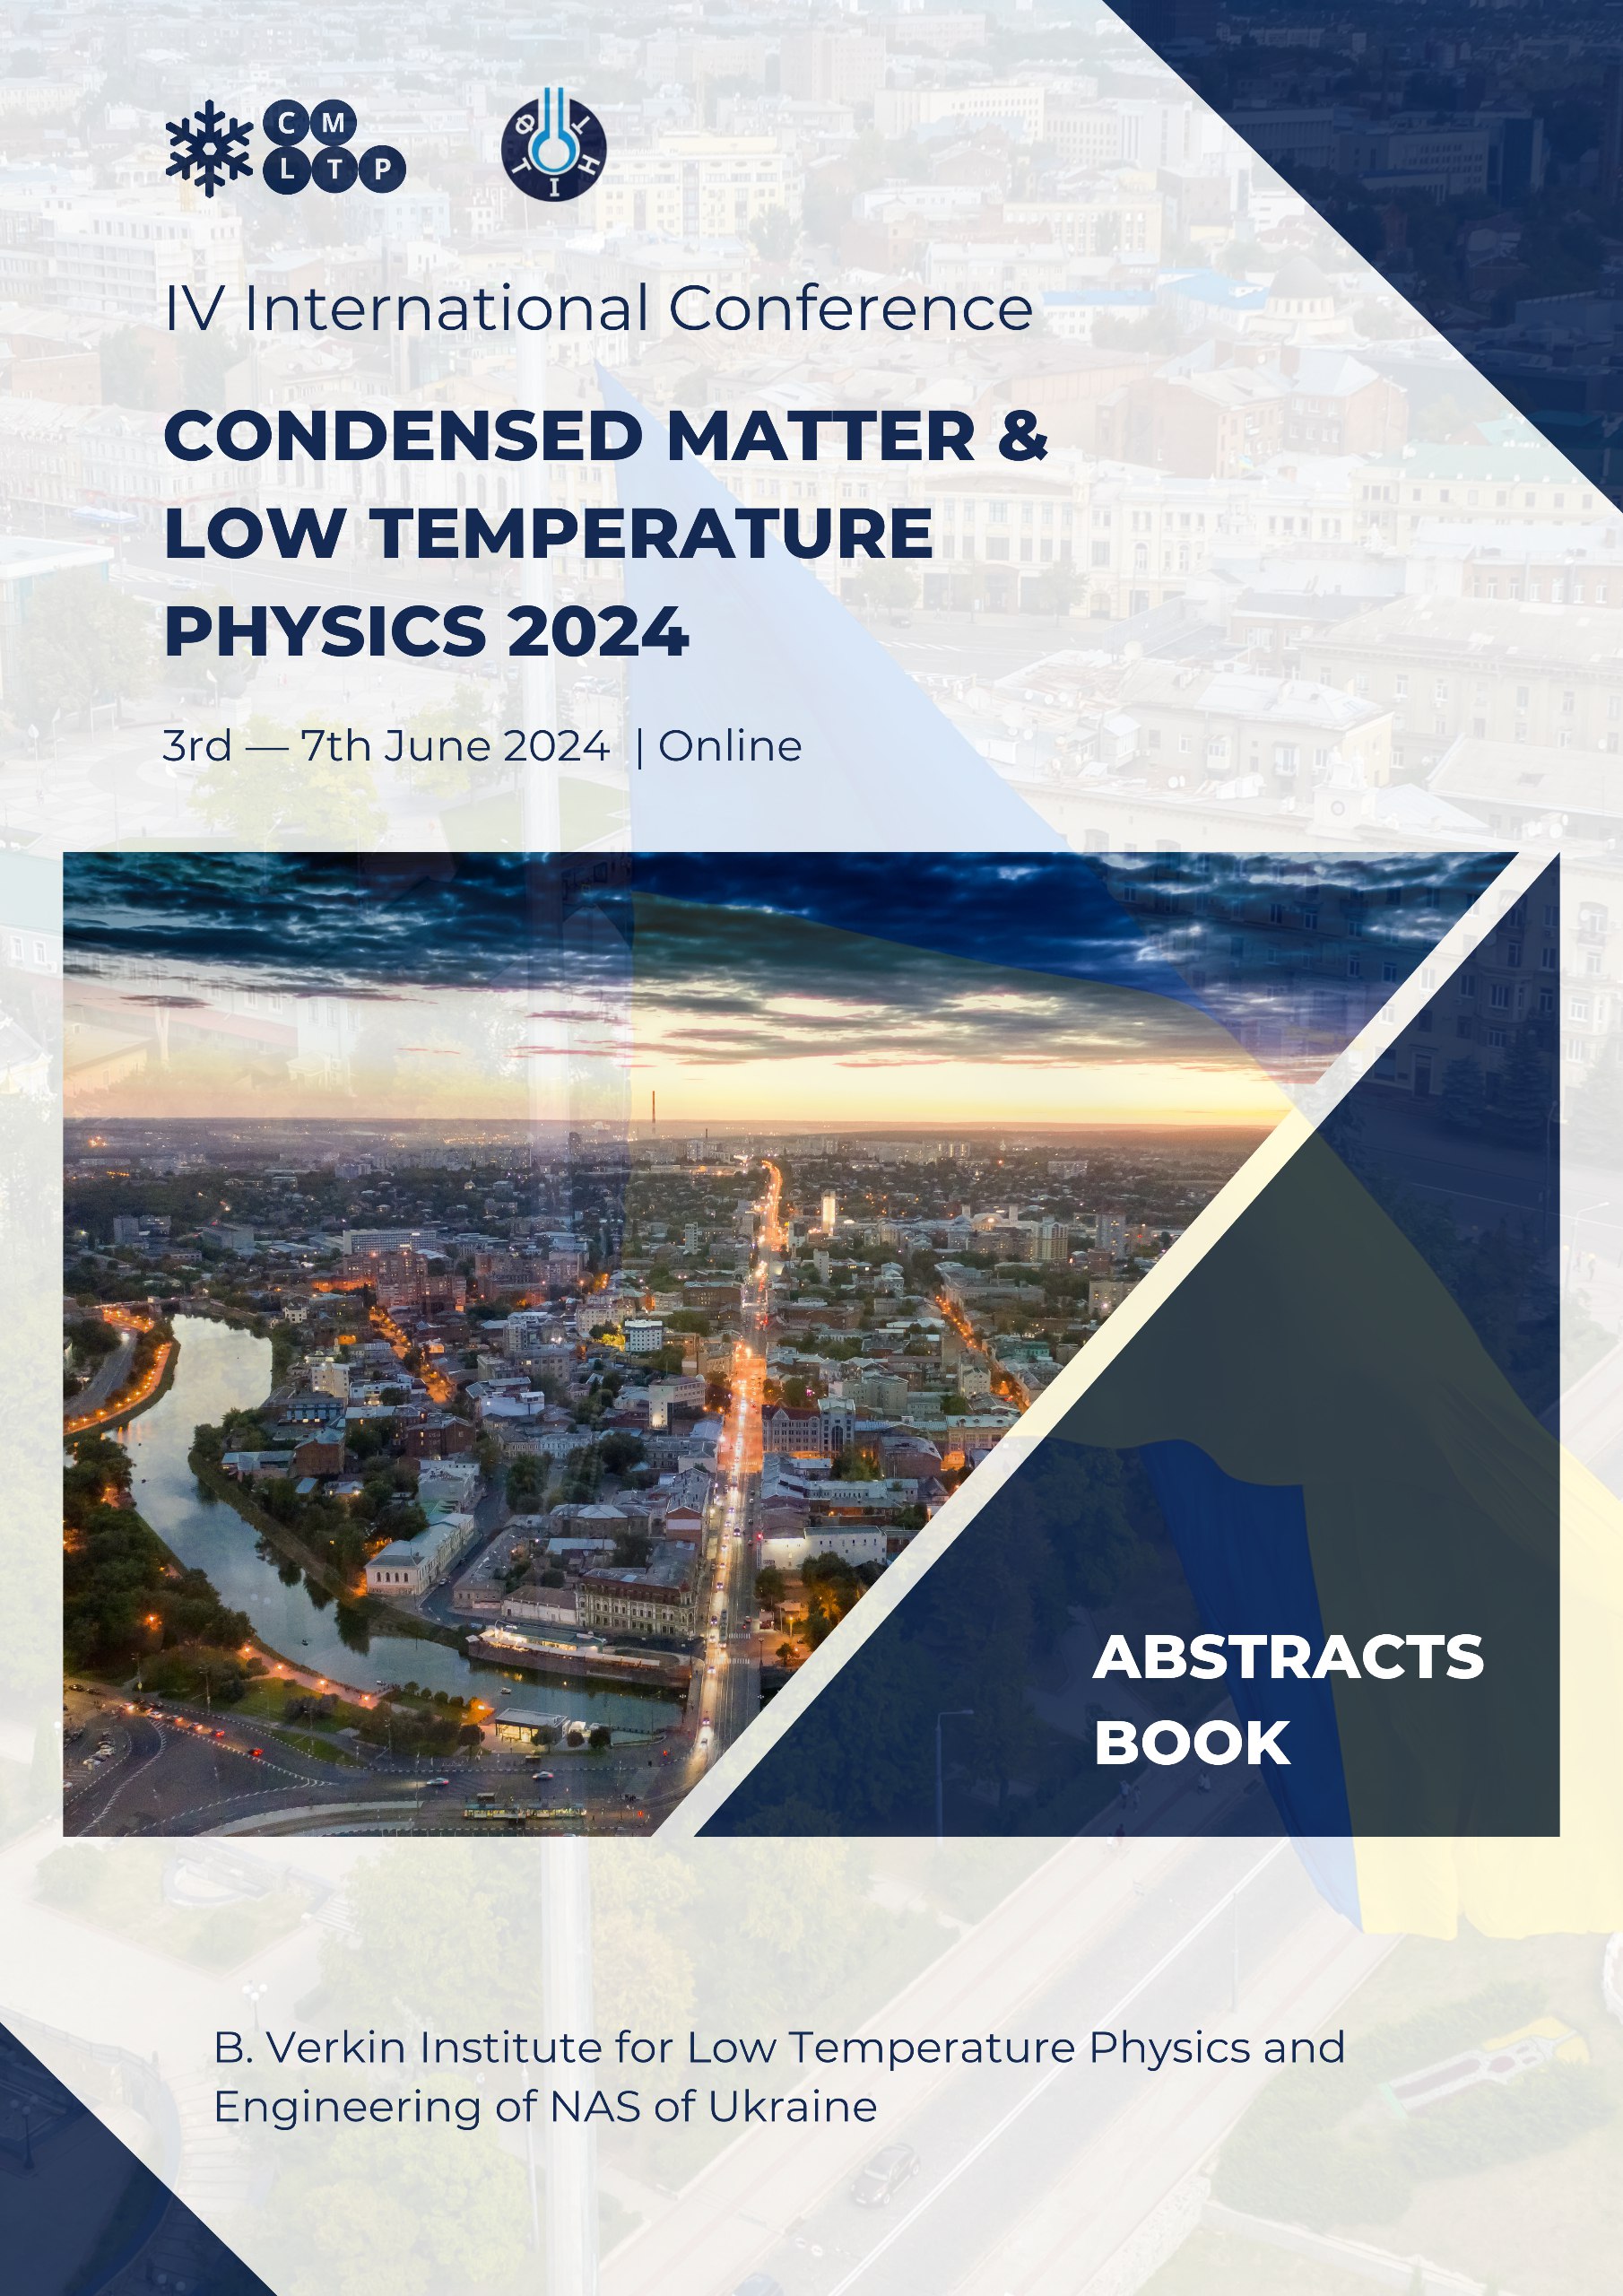 Book of Abstracts CM&LTP2024